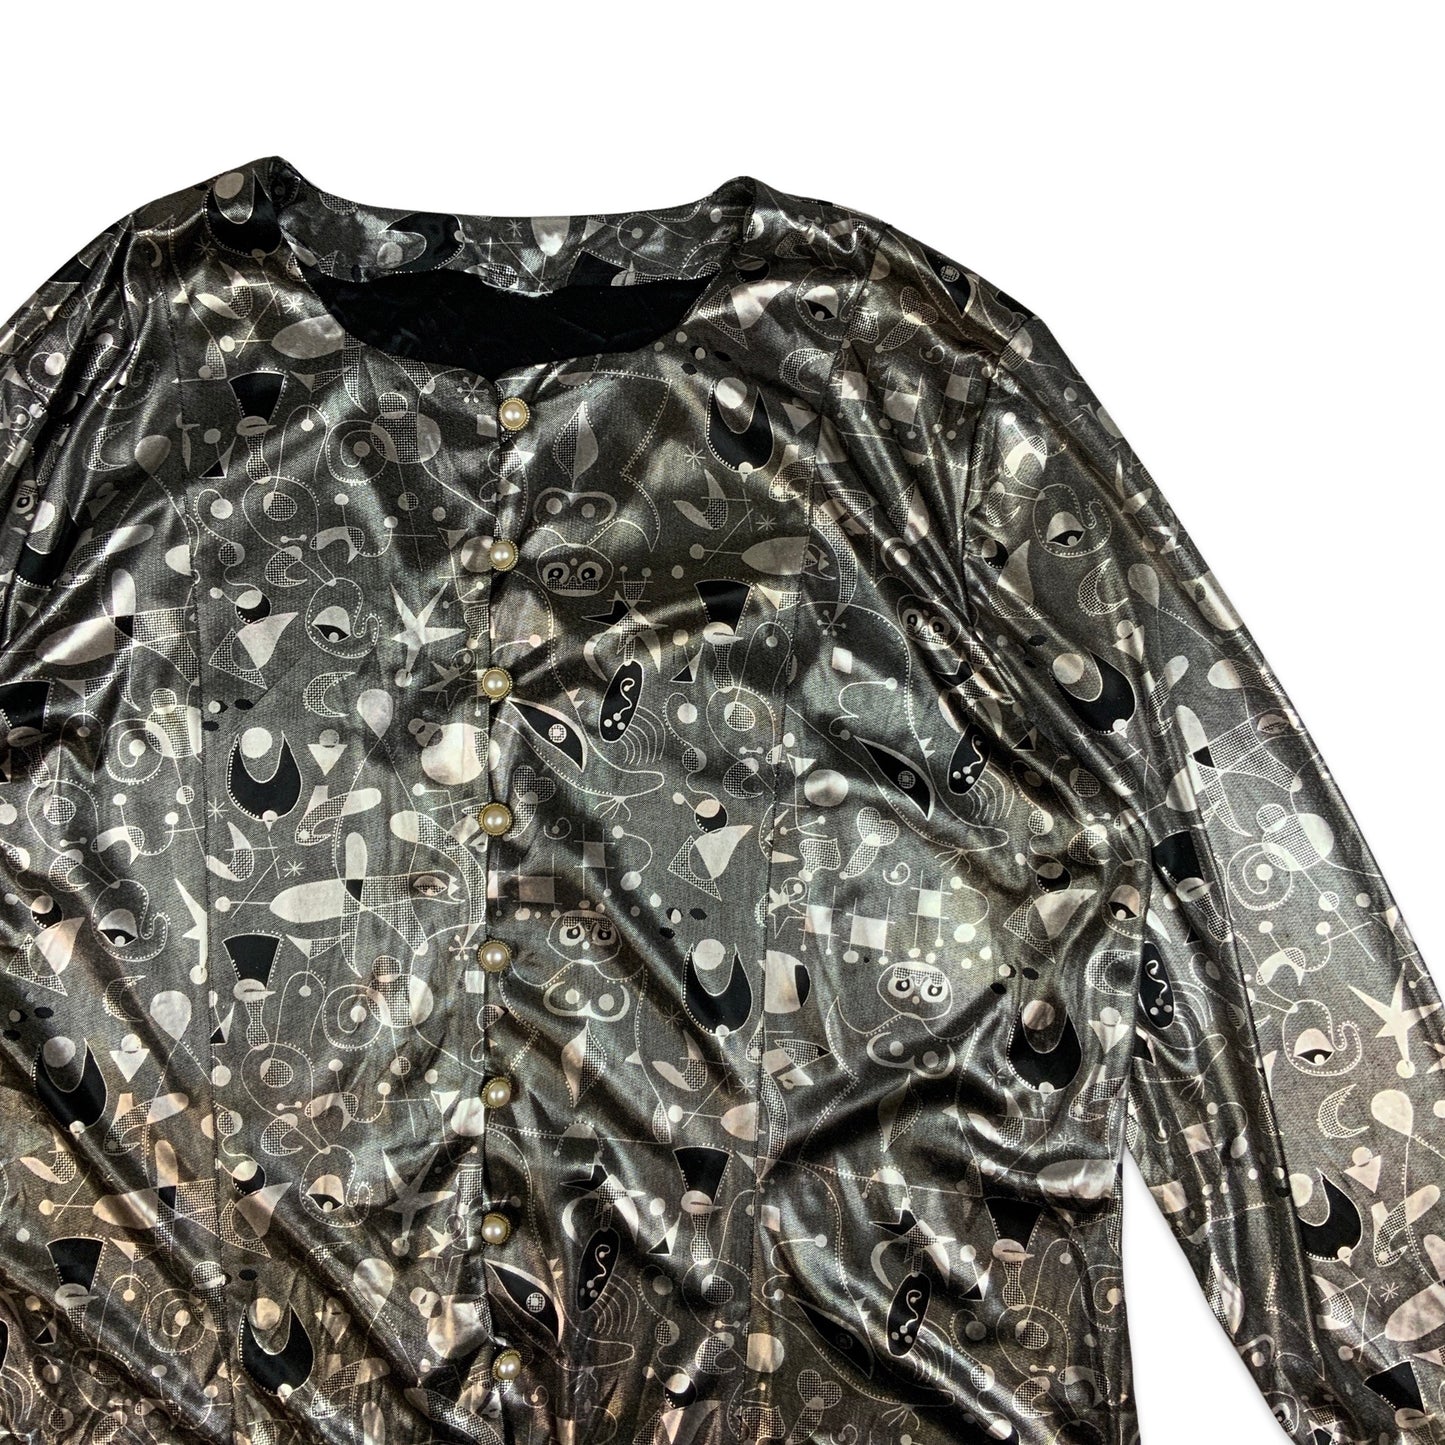 Vintage Black and Silver Abstract Patterned Blouse 16 18 20 22